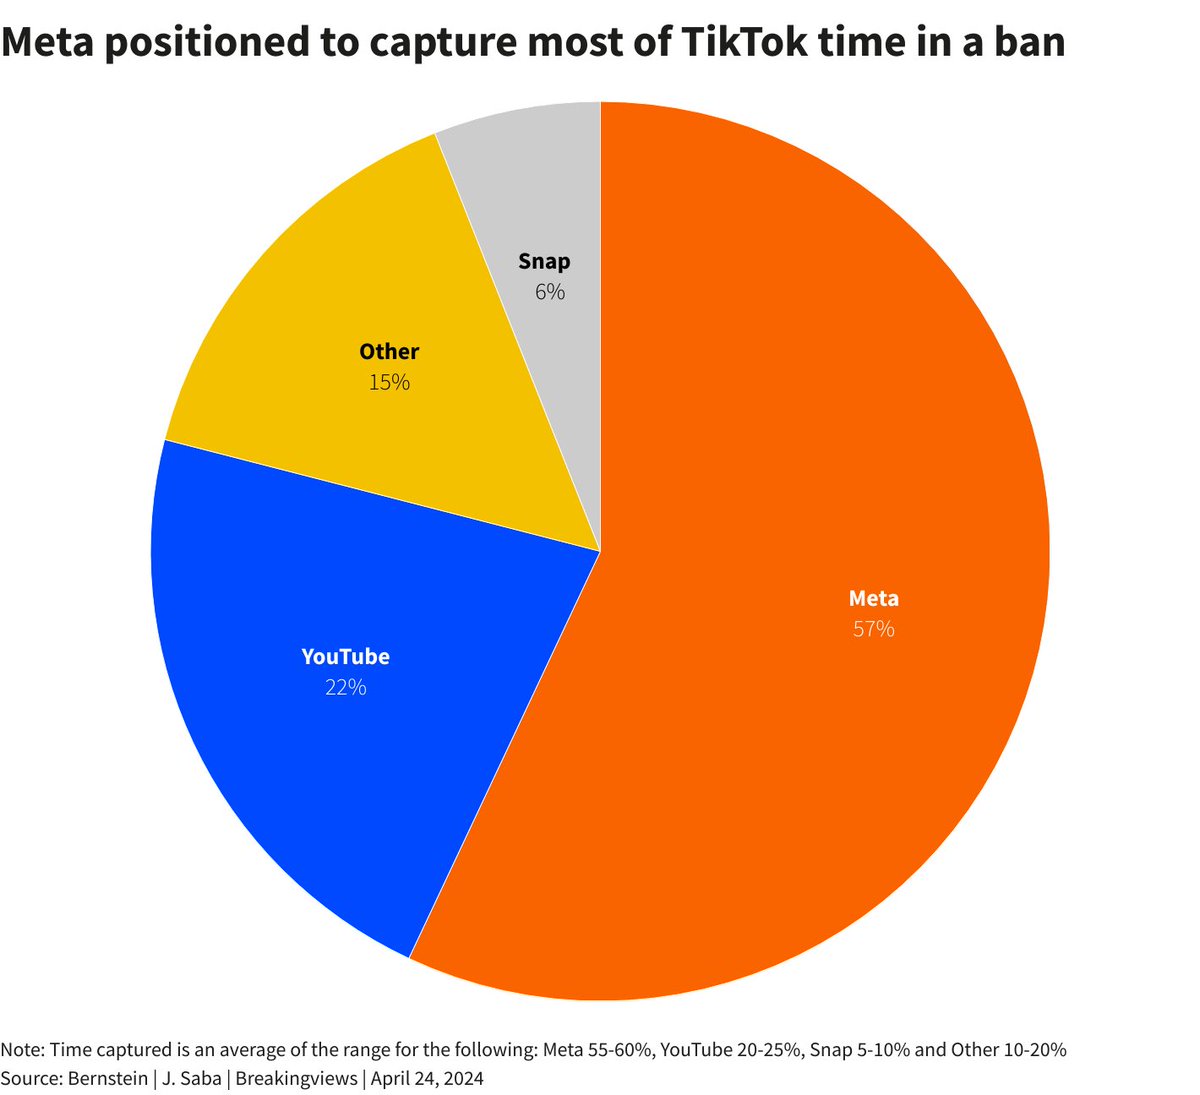 Here’s who benefits the most from a TikTok ban. Meta: 57% of TikTok users Youtube: 22% Other: 15% Snap: 6% Applying the same portion (57%) of the revenue of TikTok, Bernstein analysts forecast $12 billion of revenue in 2025 to Meta. But this is just one of the concerns.…